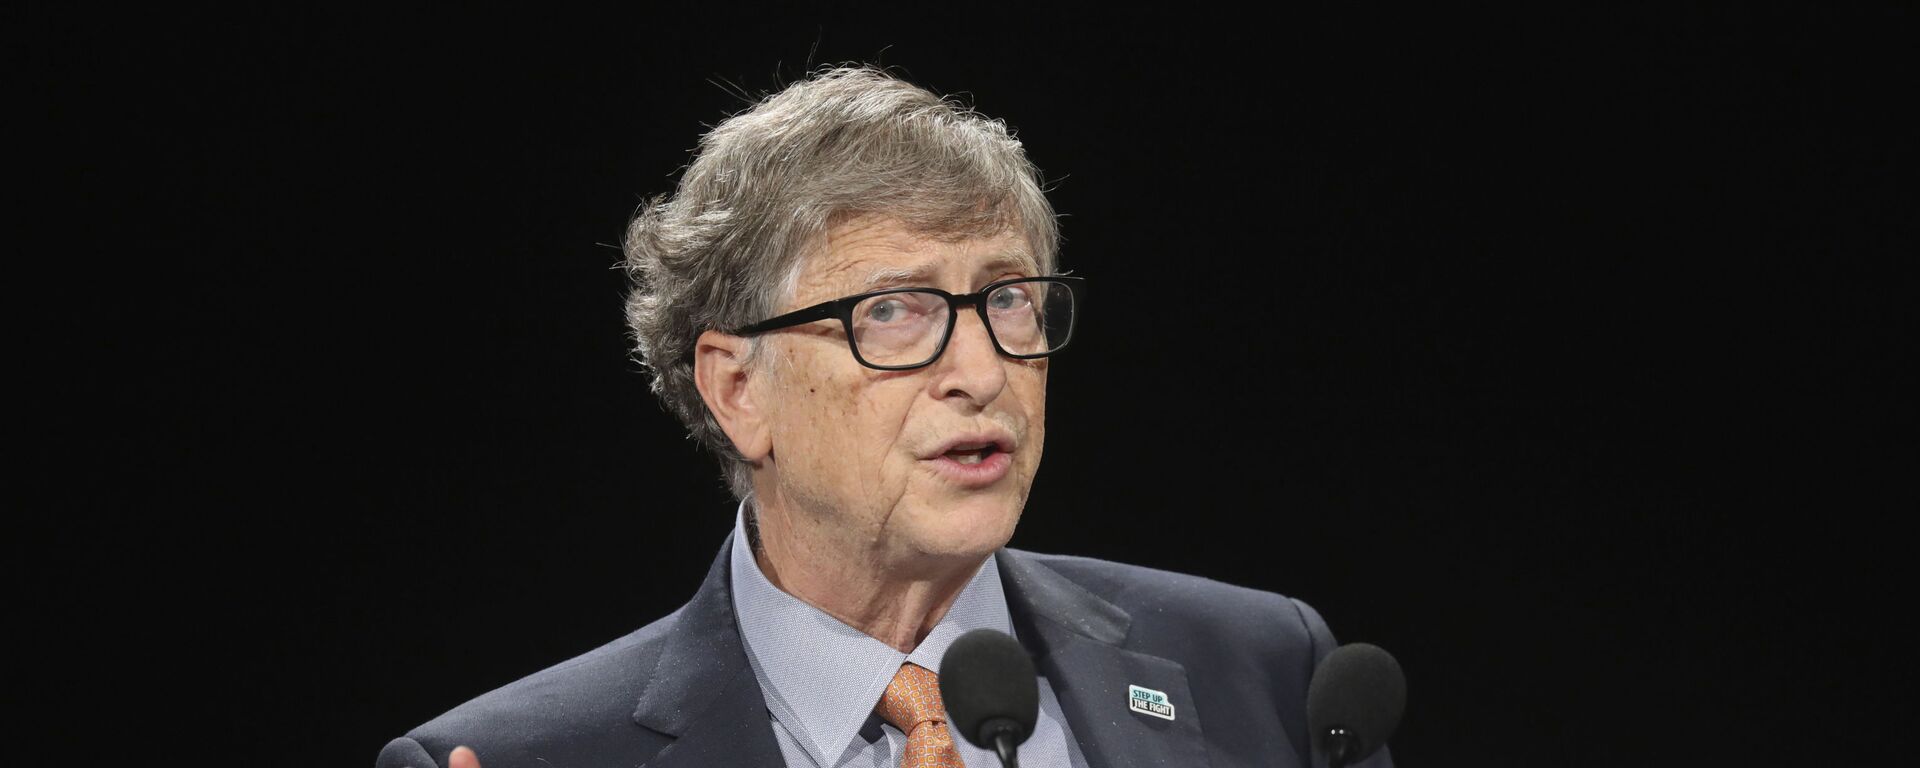 Bill Gates gestures as he speaks to the audience during the Global Fund to Fight AIDS event - Sputnik International, 1920, 20.01.2022